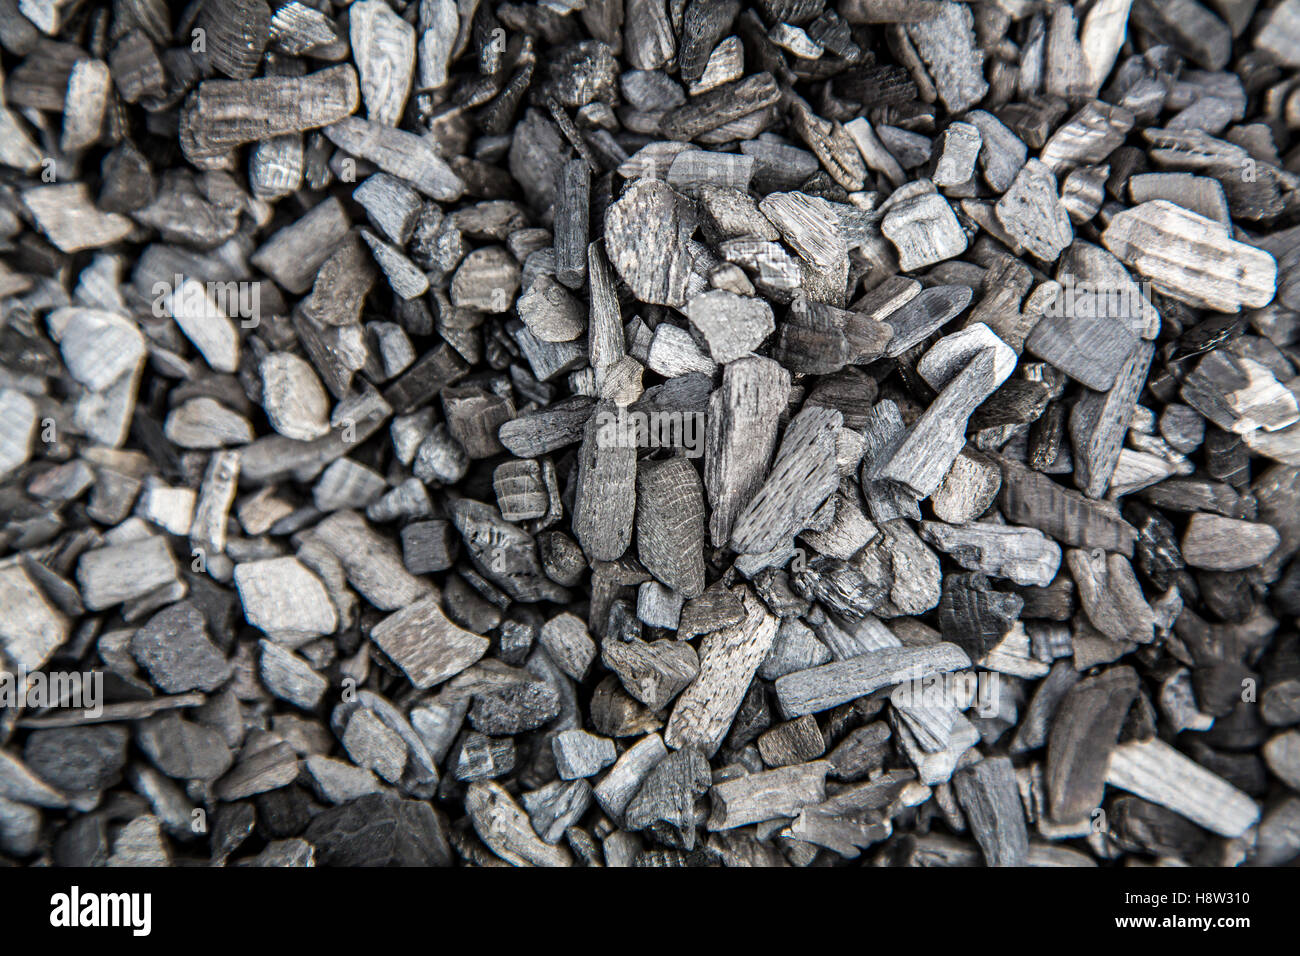 Charcoal, made in a charcoal burner, charcoal kiln, pit, made from beech wood, Stock Photo